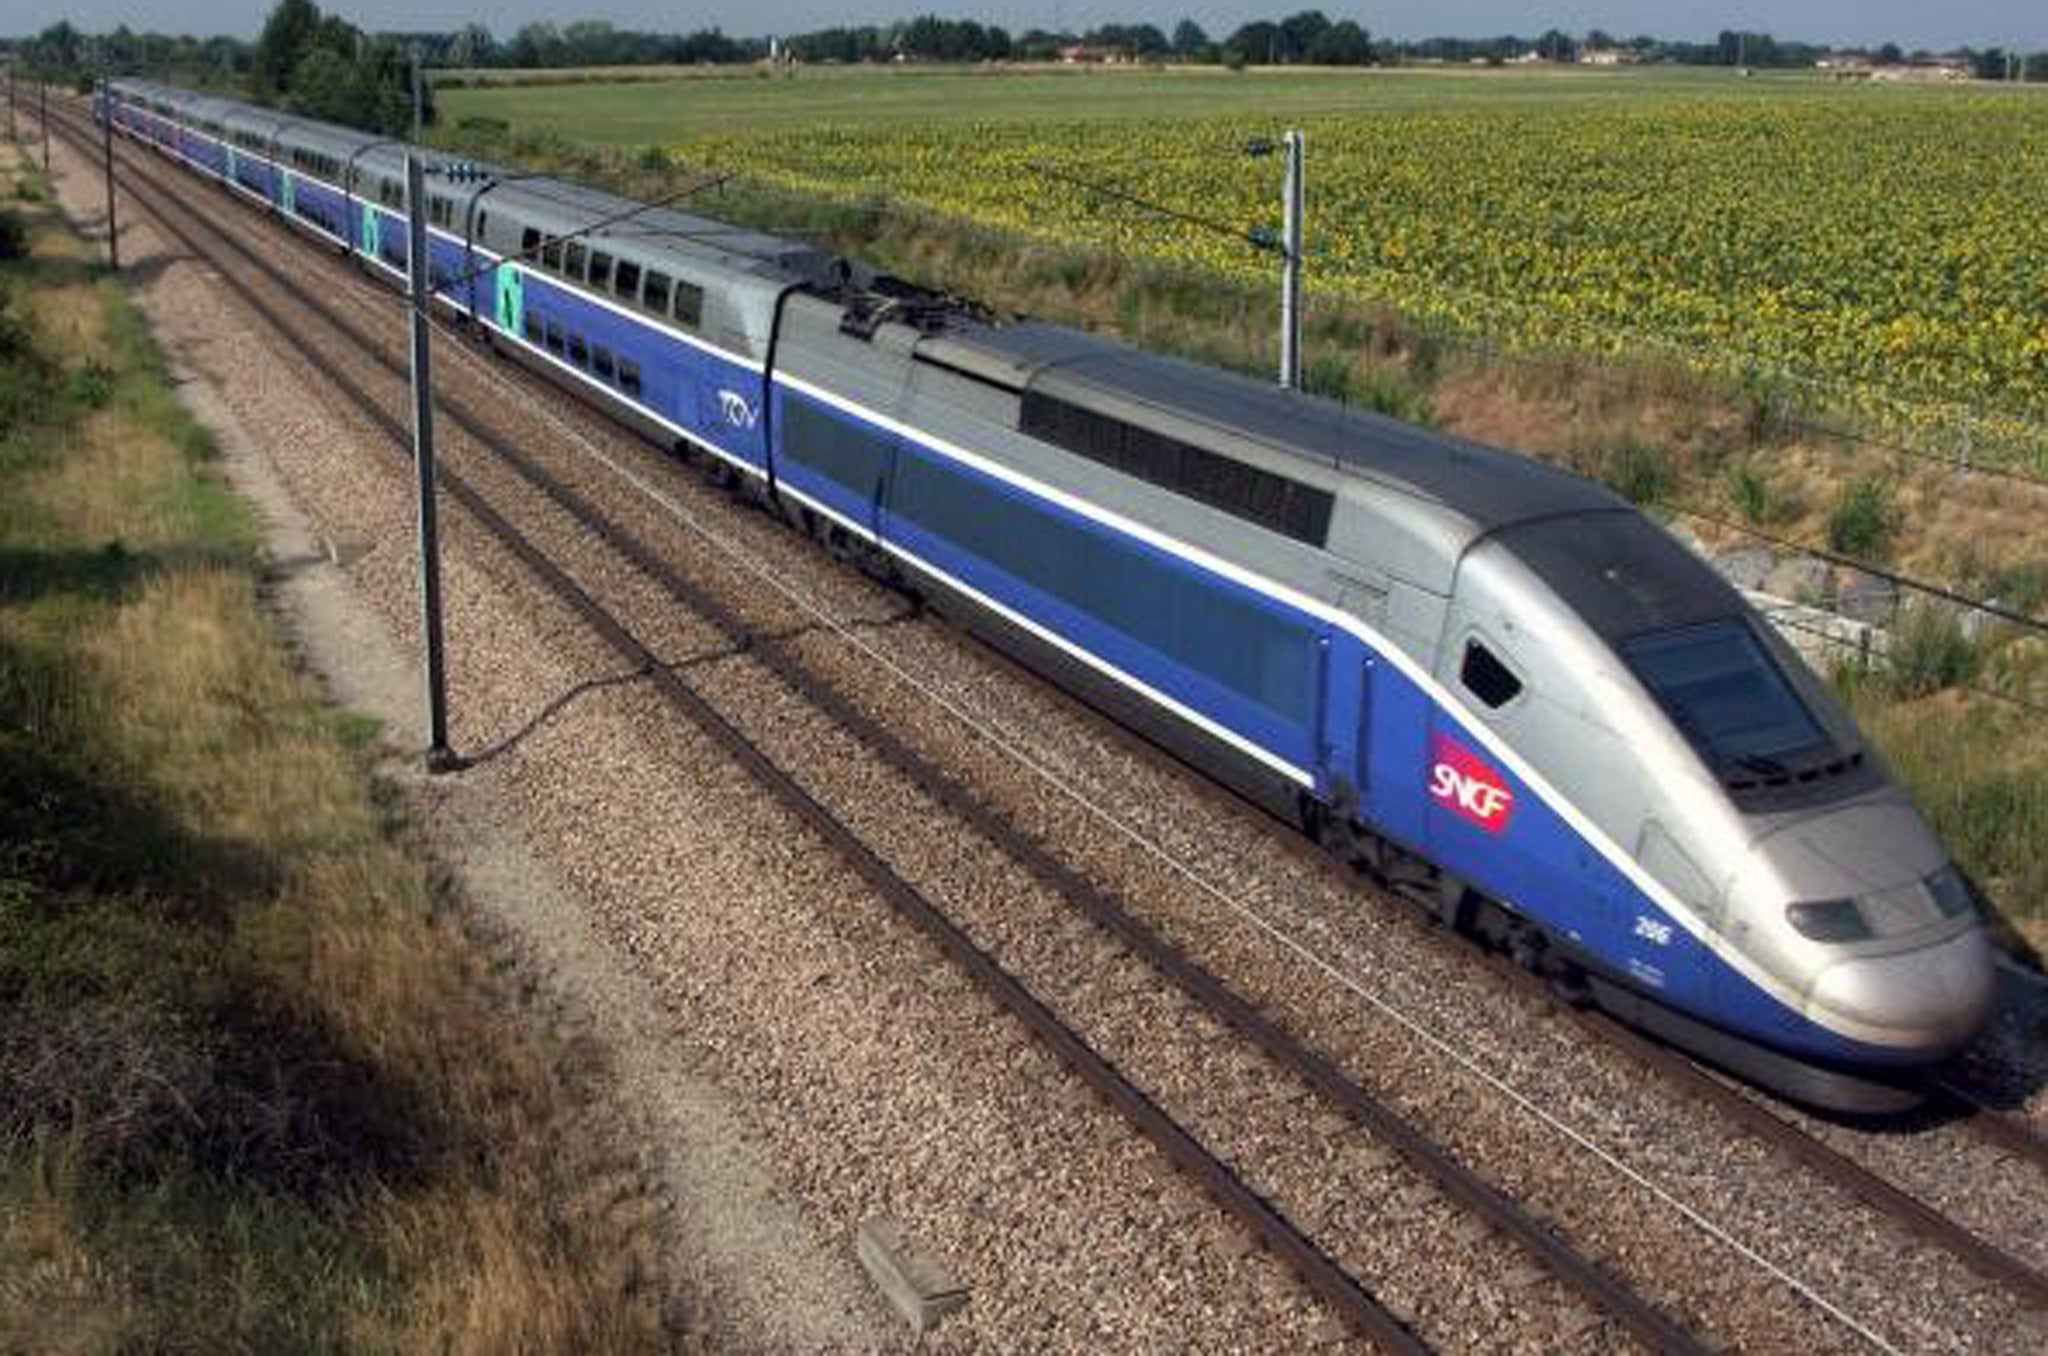 The incident occurred on an SNCF train